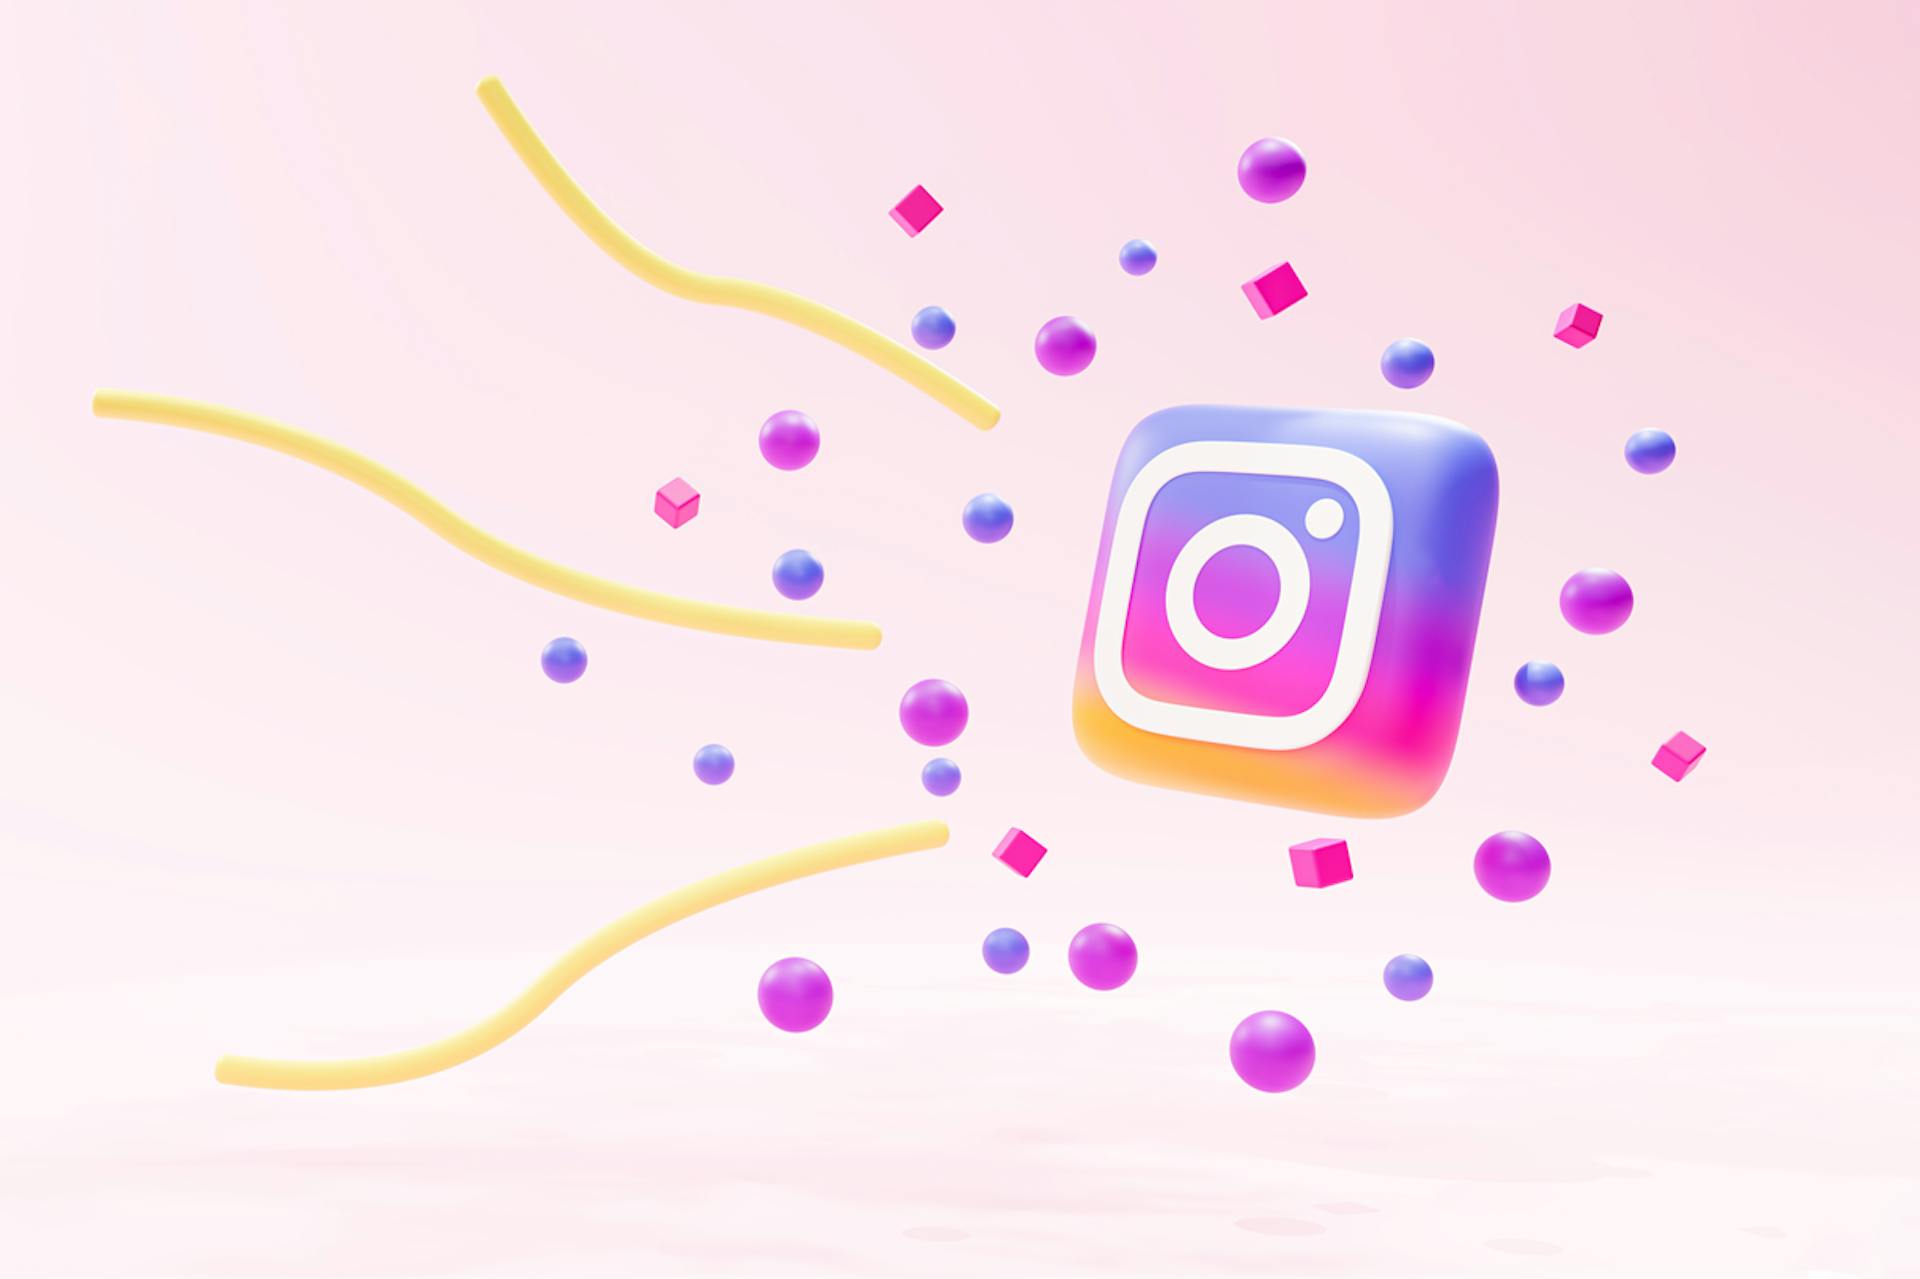 Instagram trends blog post. Image showing Instagram logo on pale pink background surrounded by multi-colored dots and yellow squiggly lines